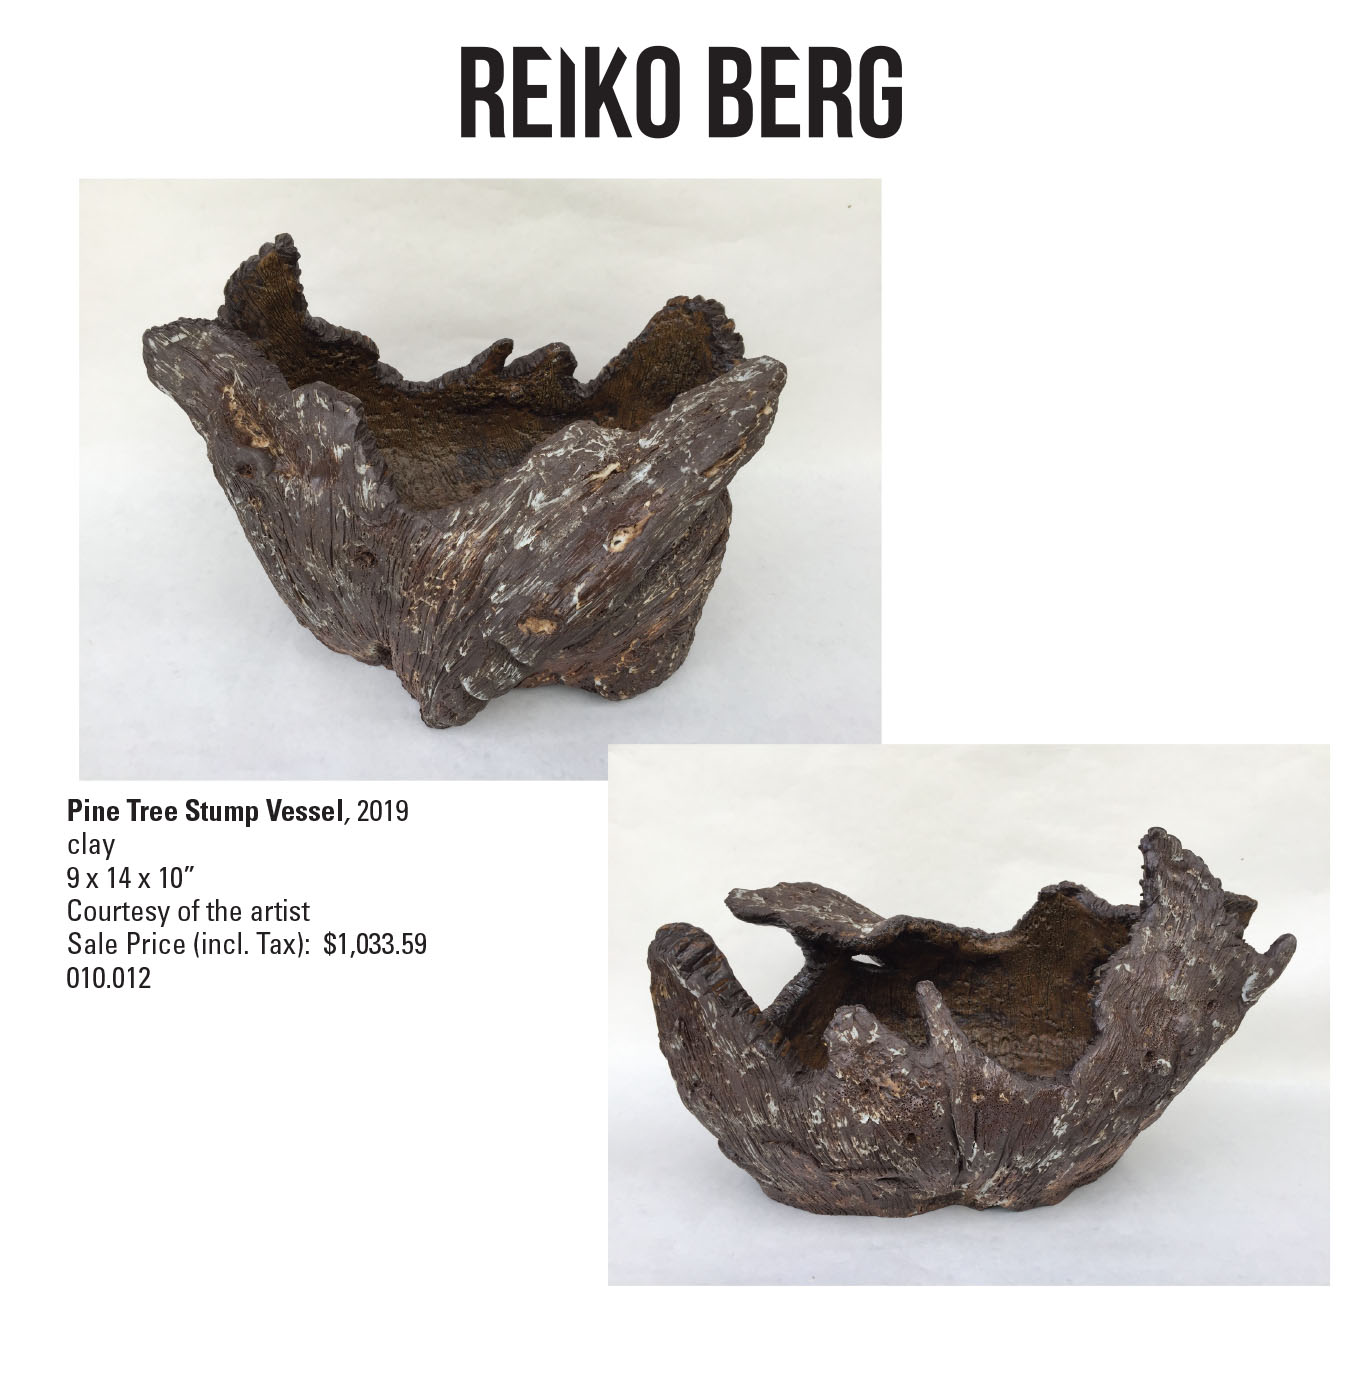 Reiko Berg, Pine Tree Stump Vessel, 2019. Clay 9 x 14 x 10" Courtesy of the artist. A rough textured brown sculpture with jagged edges